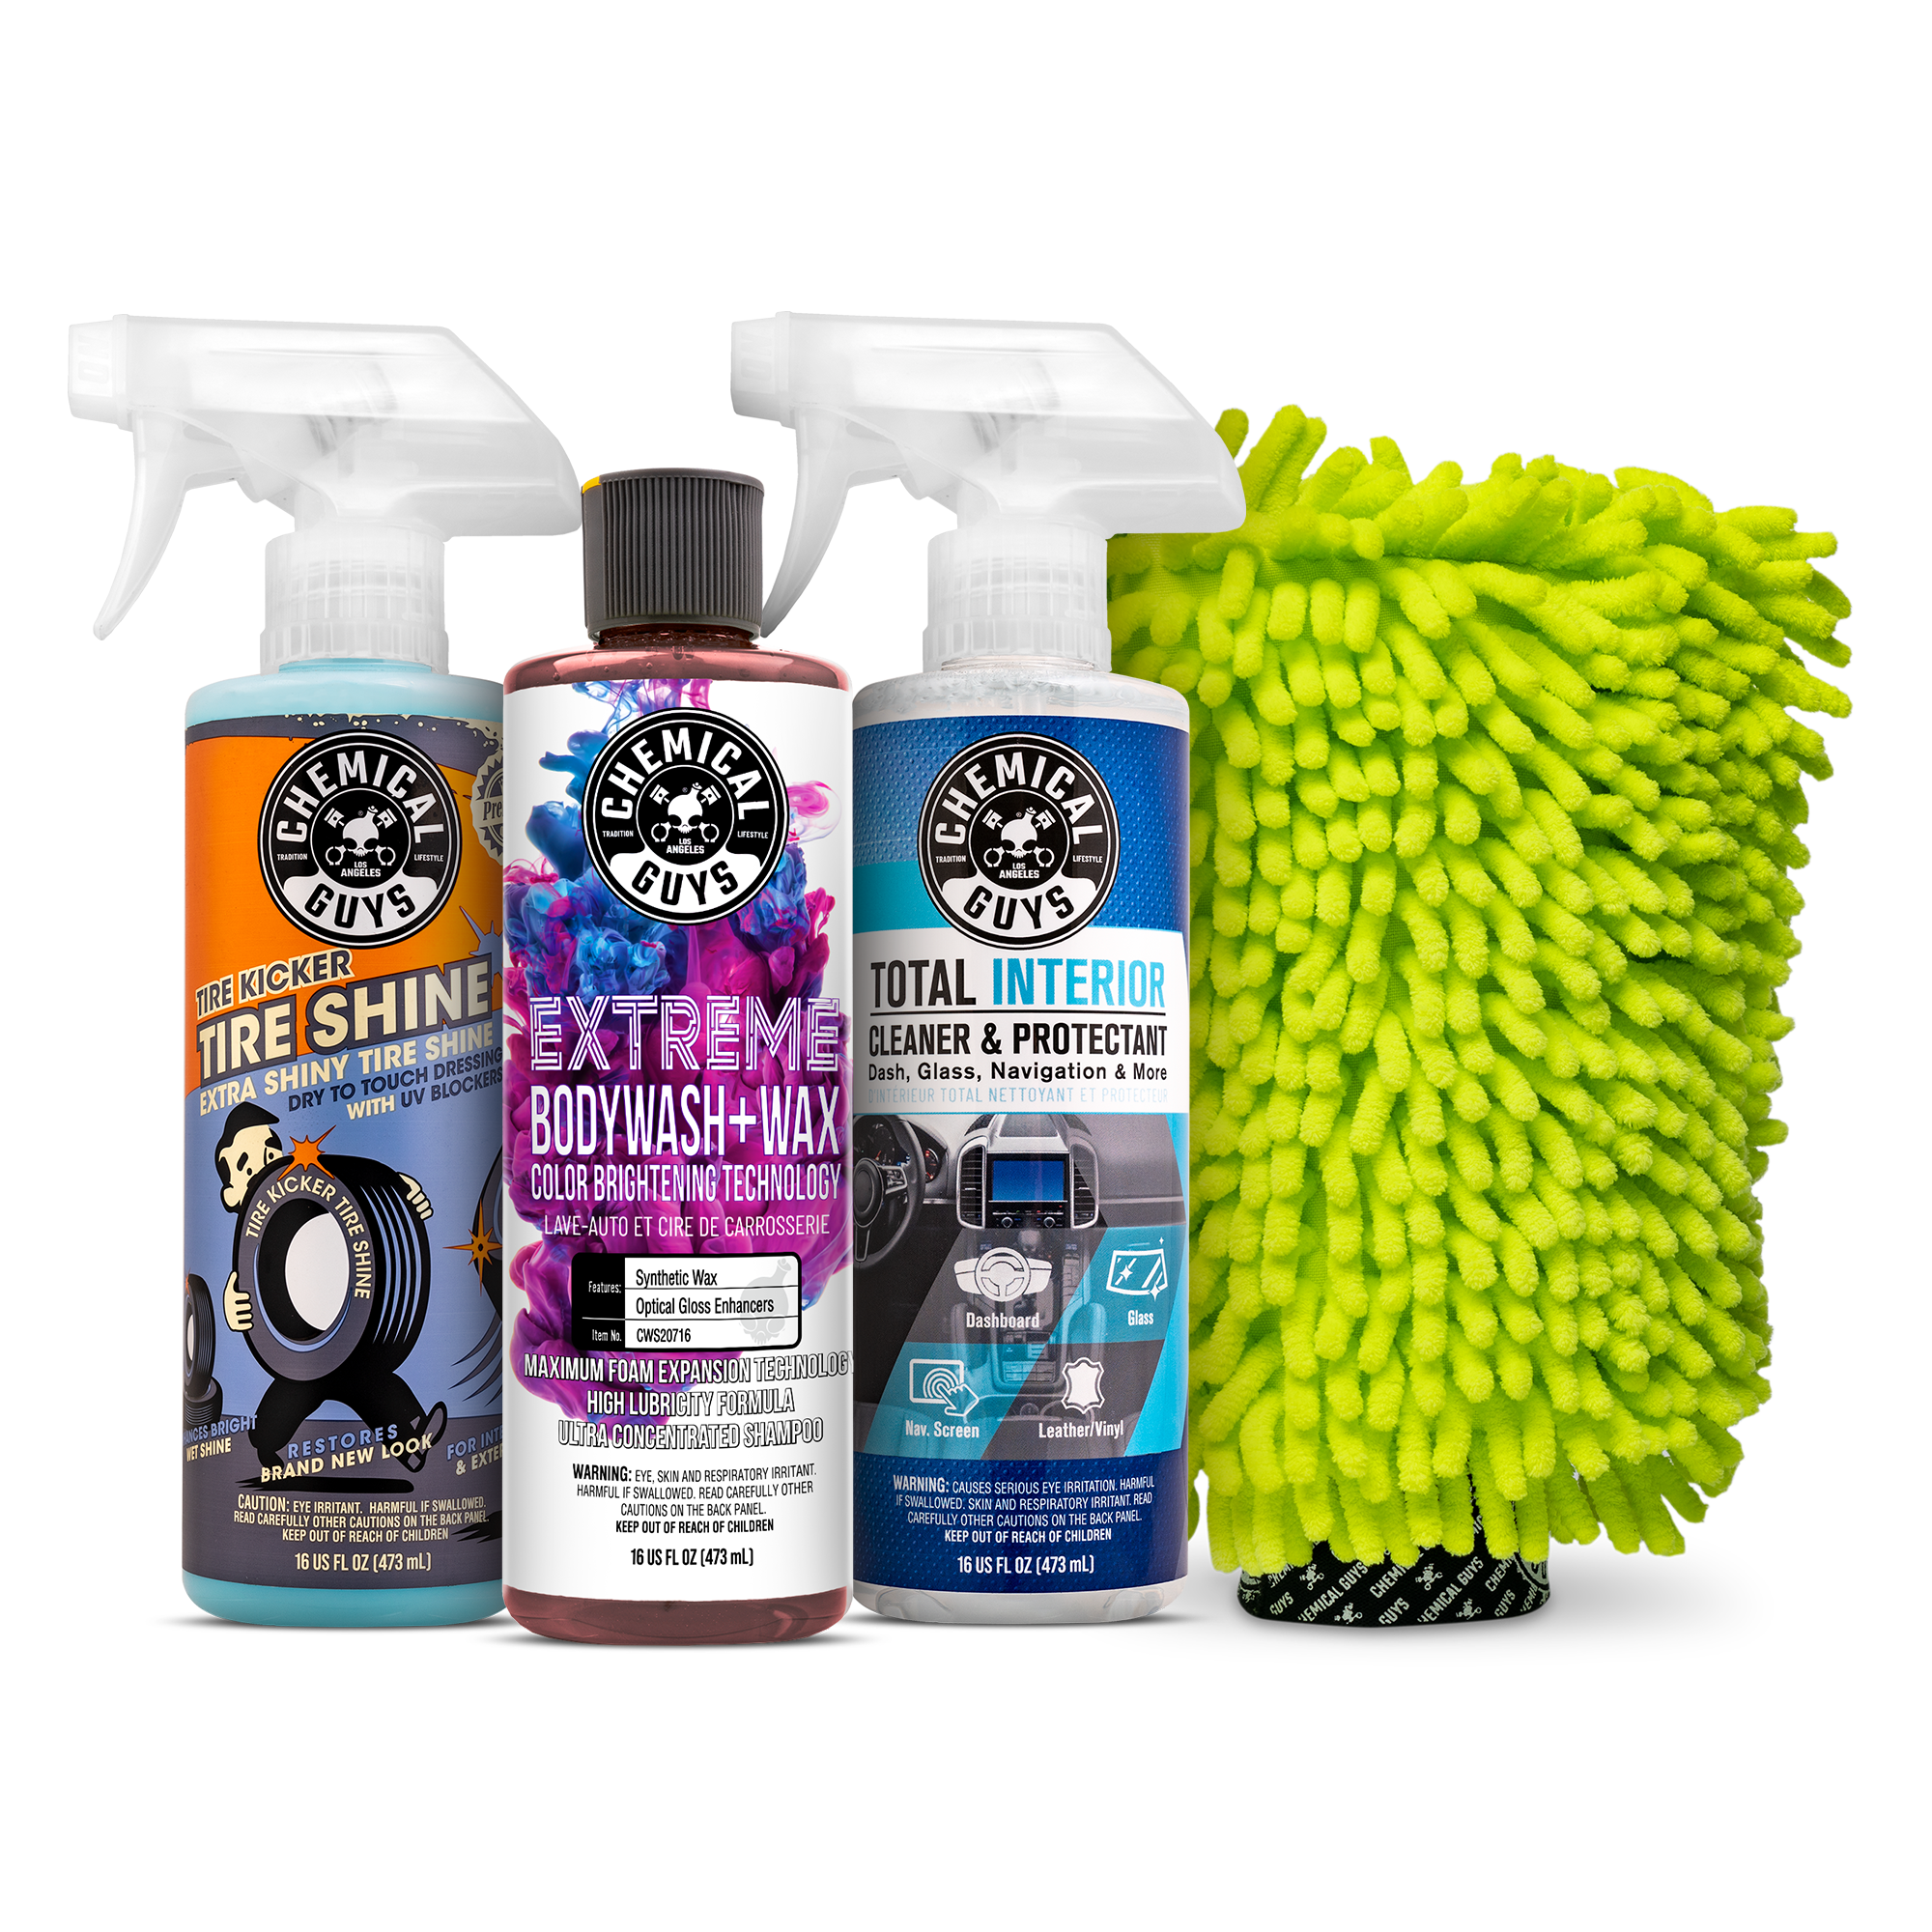 Available – Discount Car Care Products